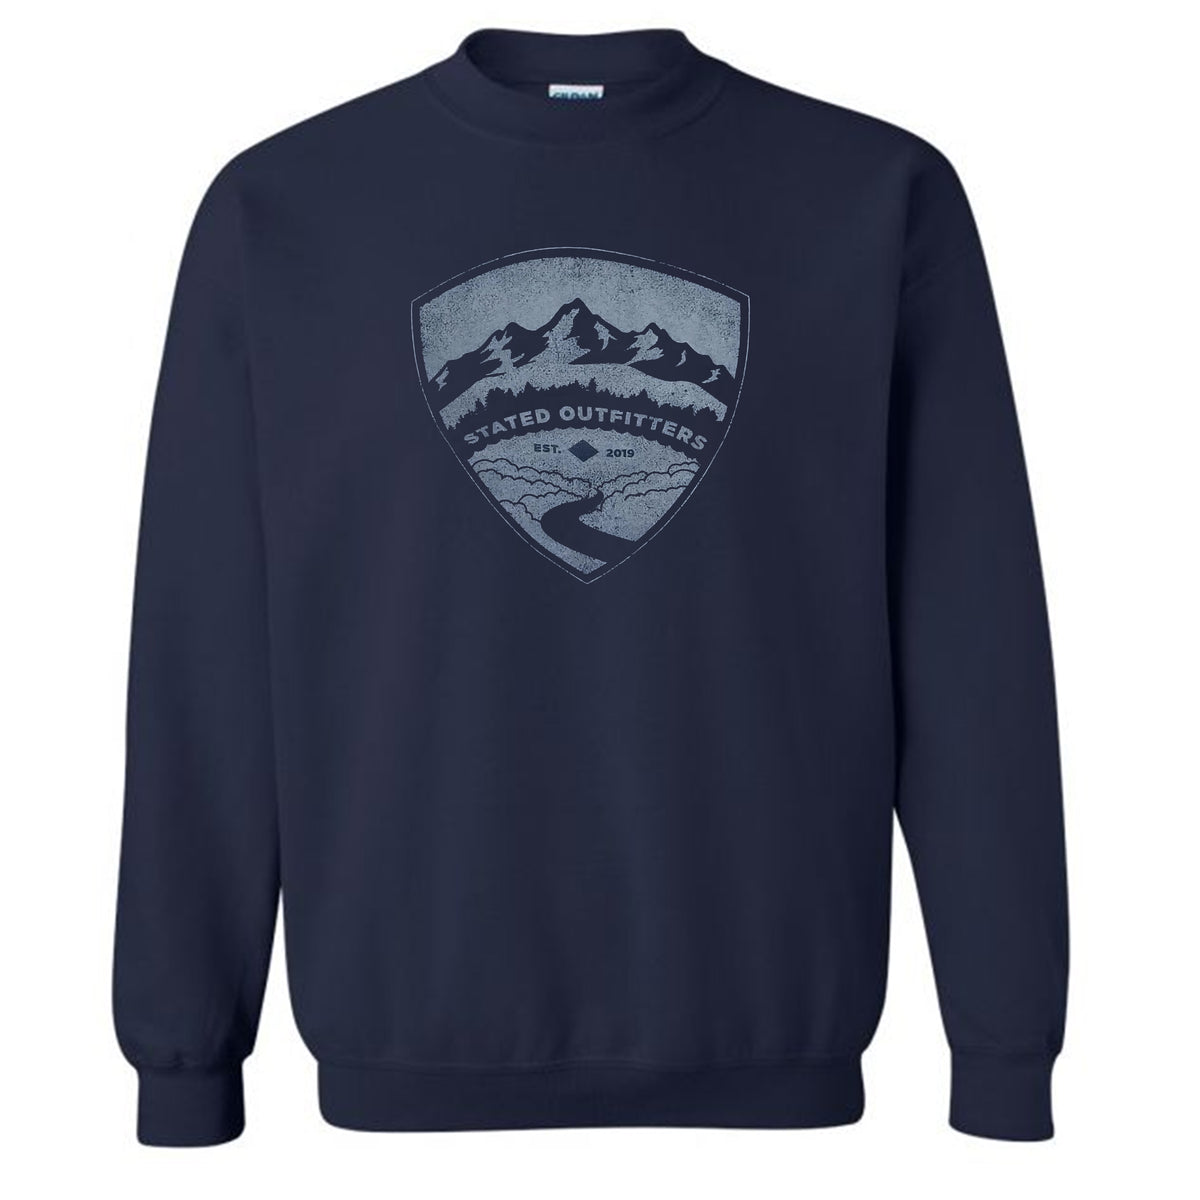 Stated outfitters Shield sweatshirt